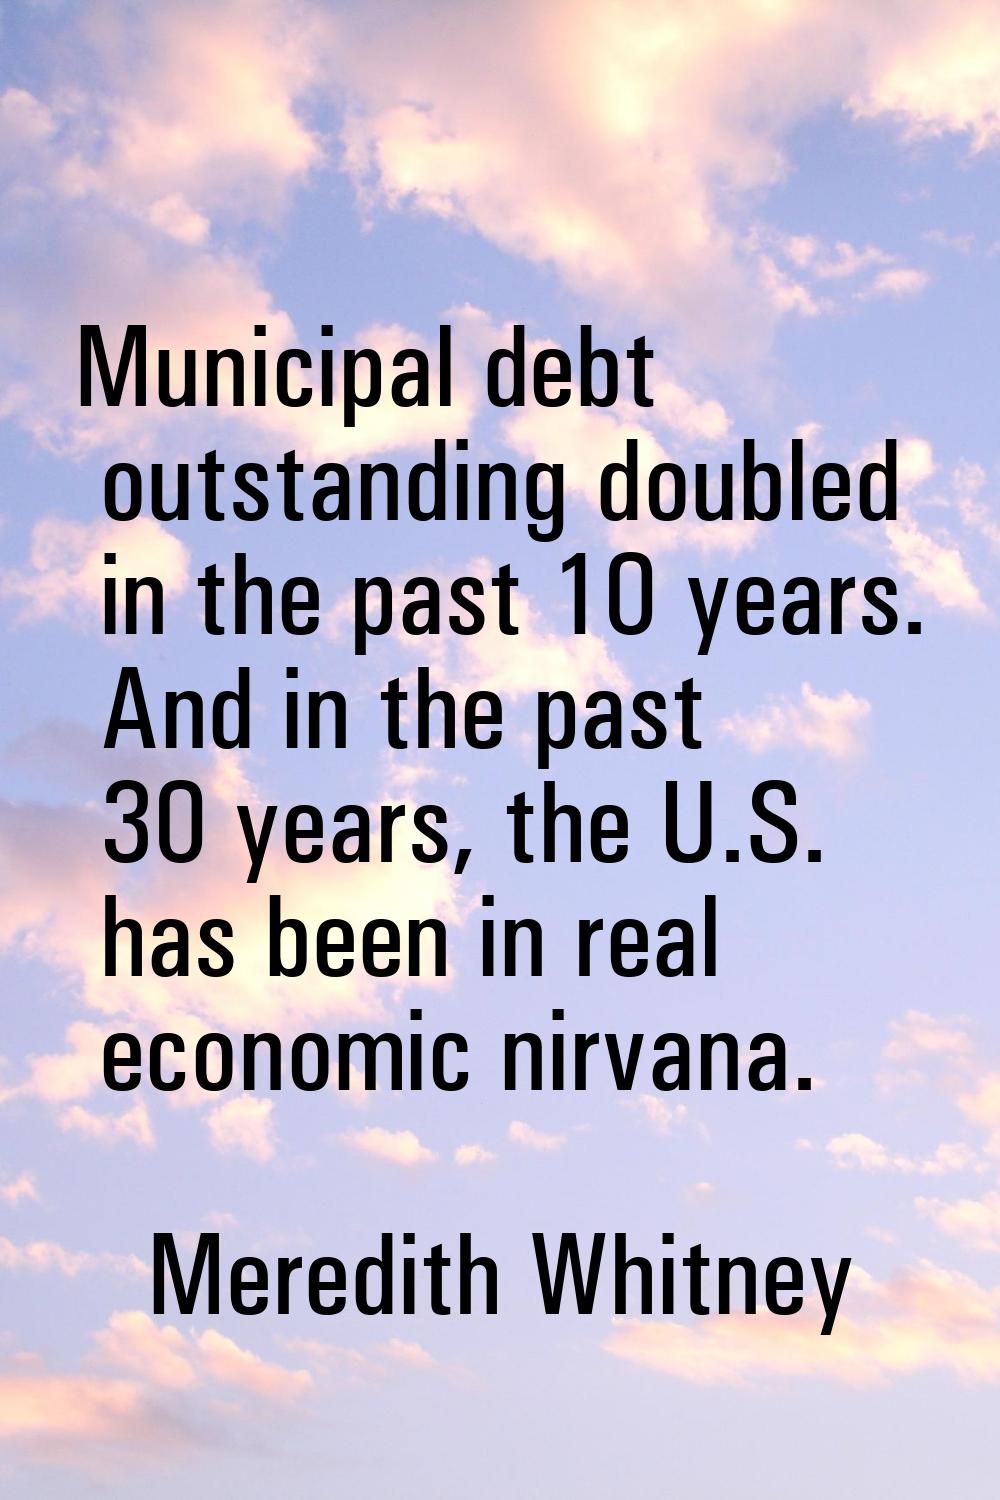 Municipal debt outstanding doubled in the past 10 years. And in the past 30 years, the U.S. has bee